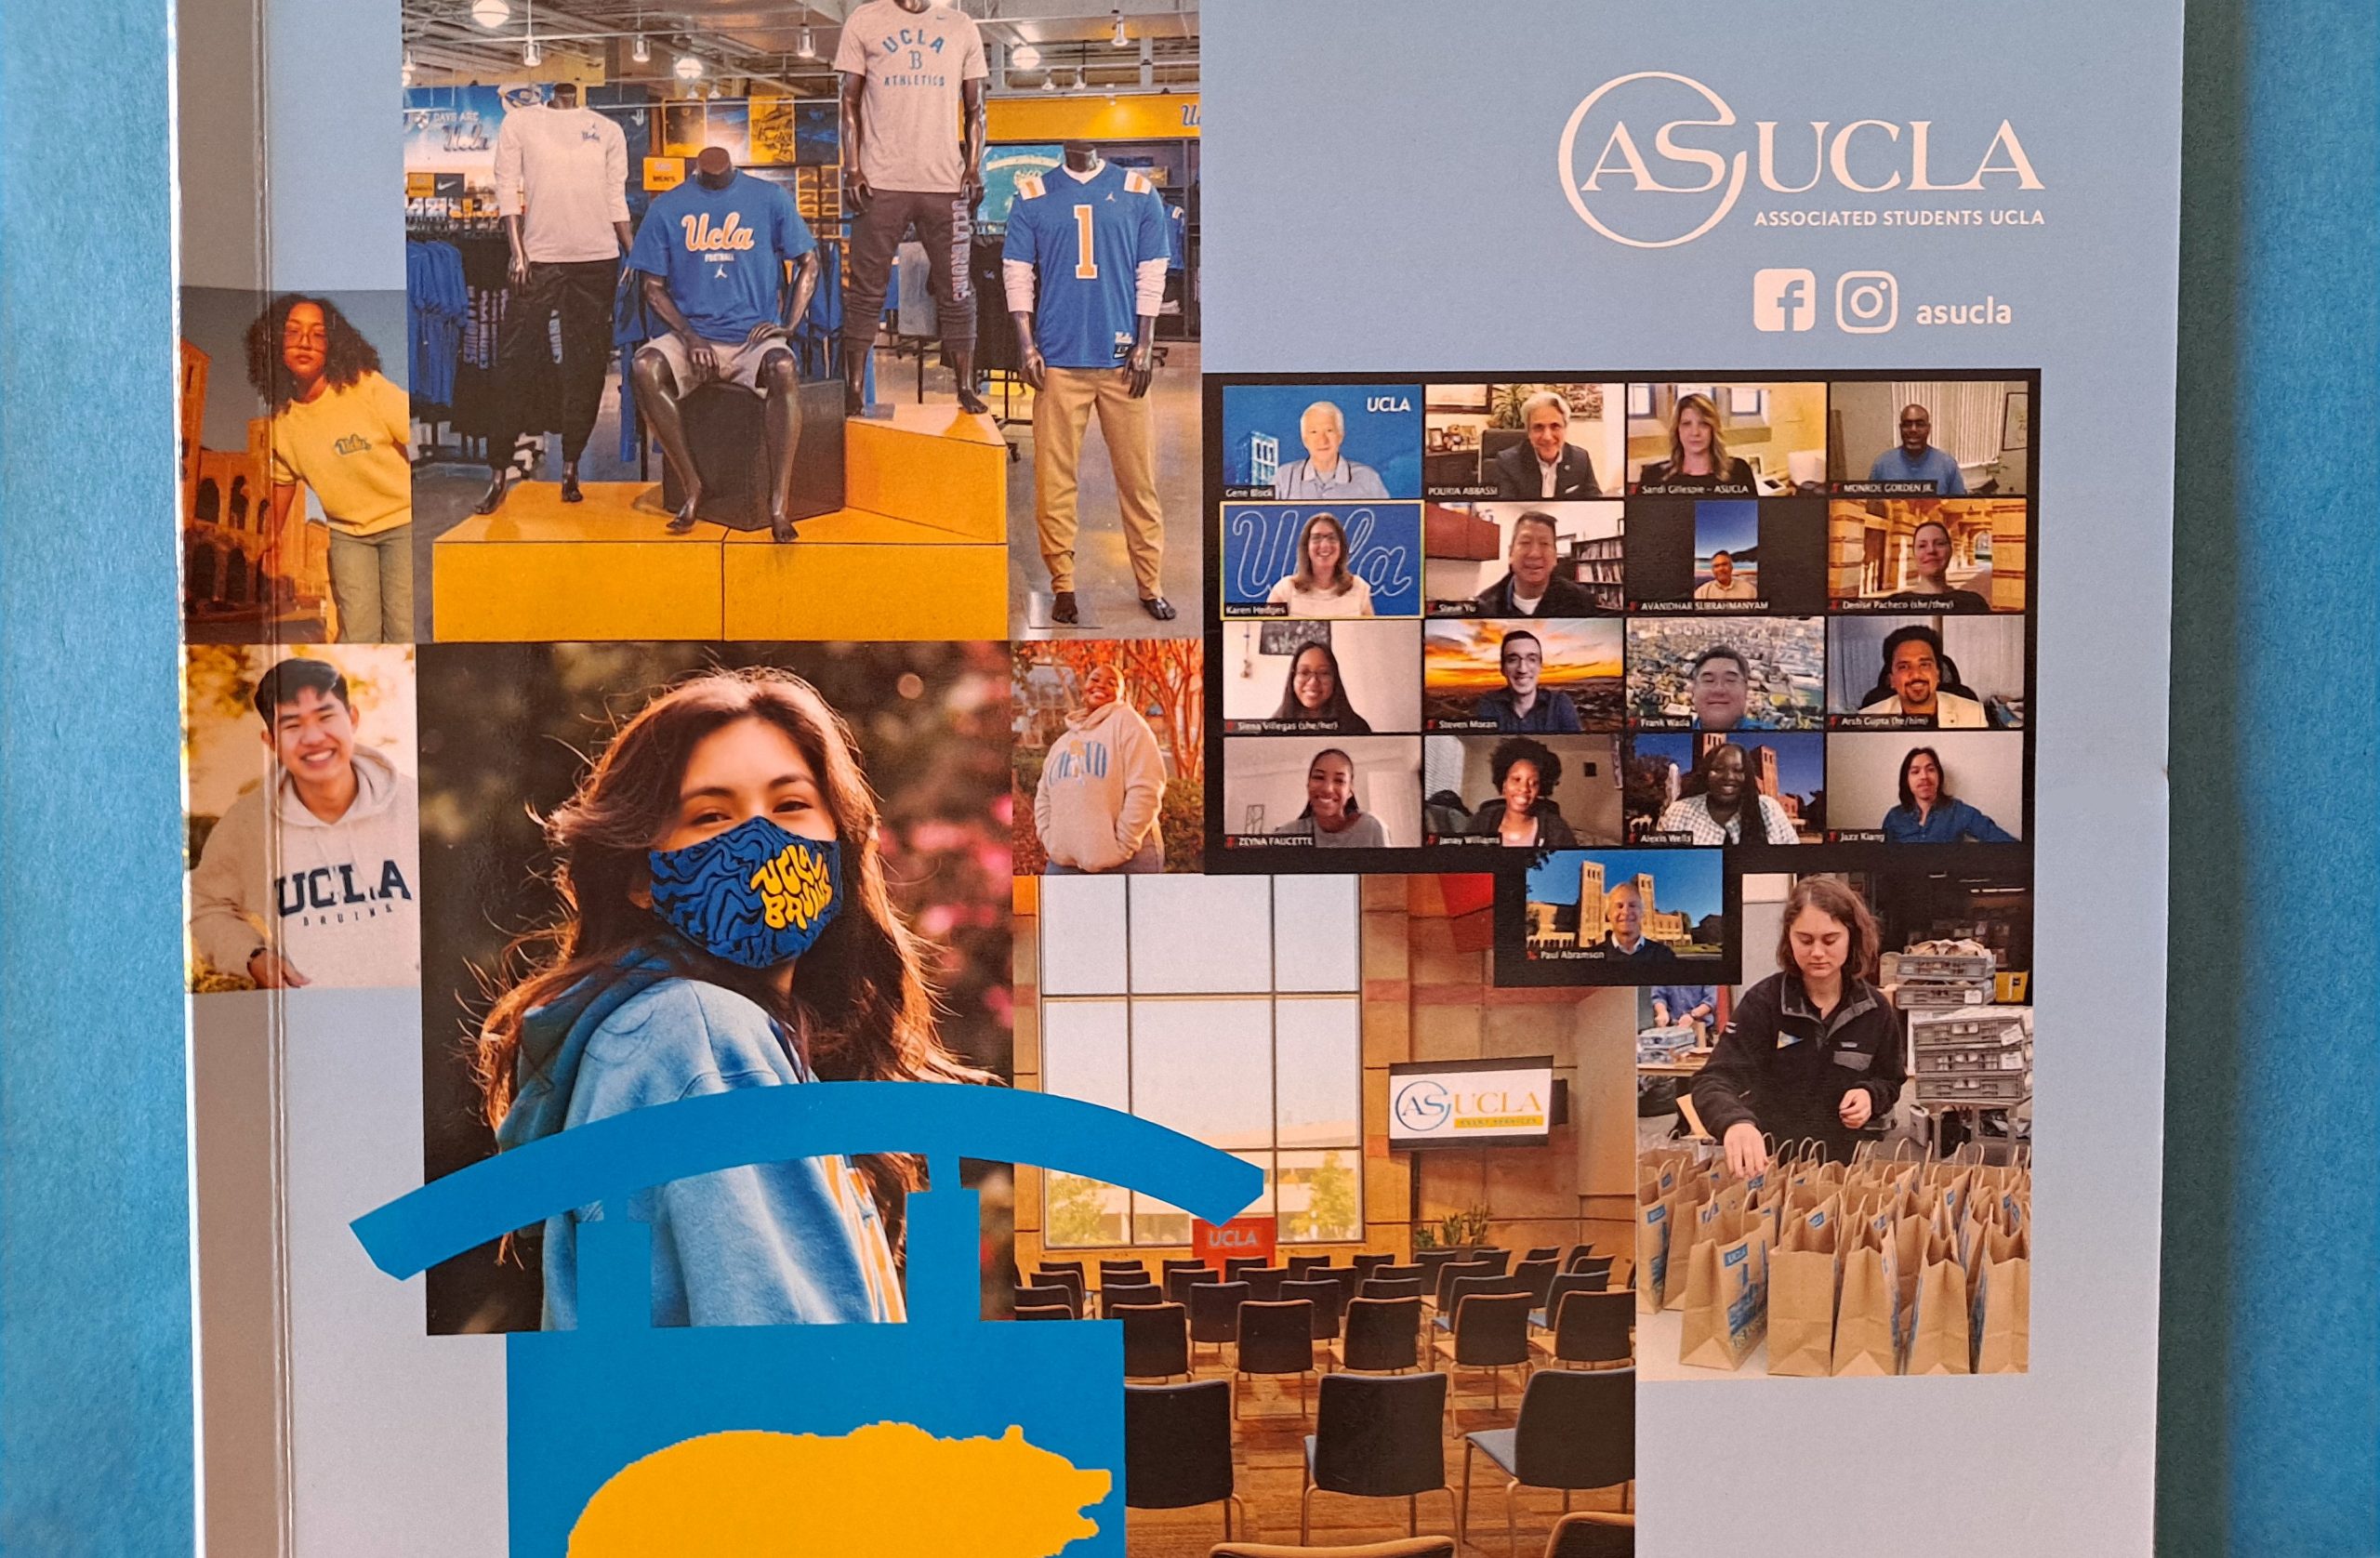 Cover shot of the ASUCLA 2022 Annual Report featuring students and images of the UCLA store